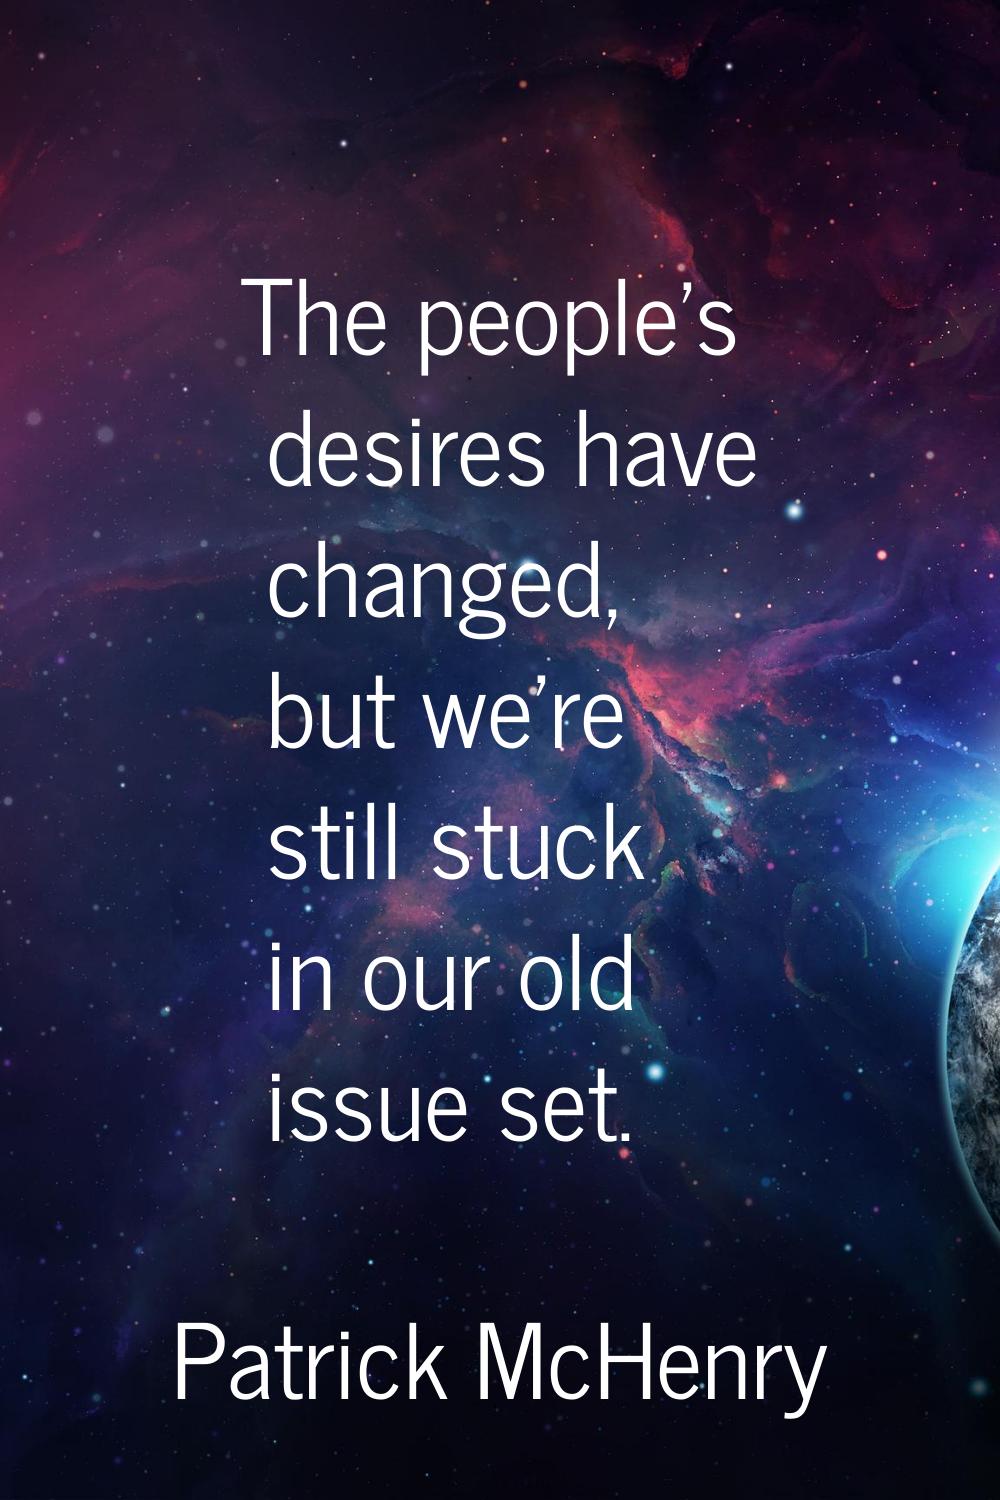 The people's desires have changed, but we're still stuck in our old issue set.